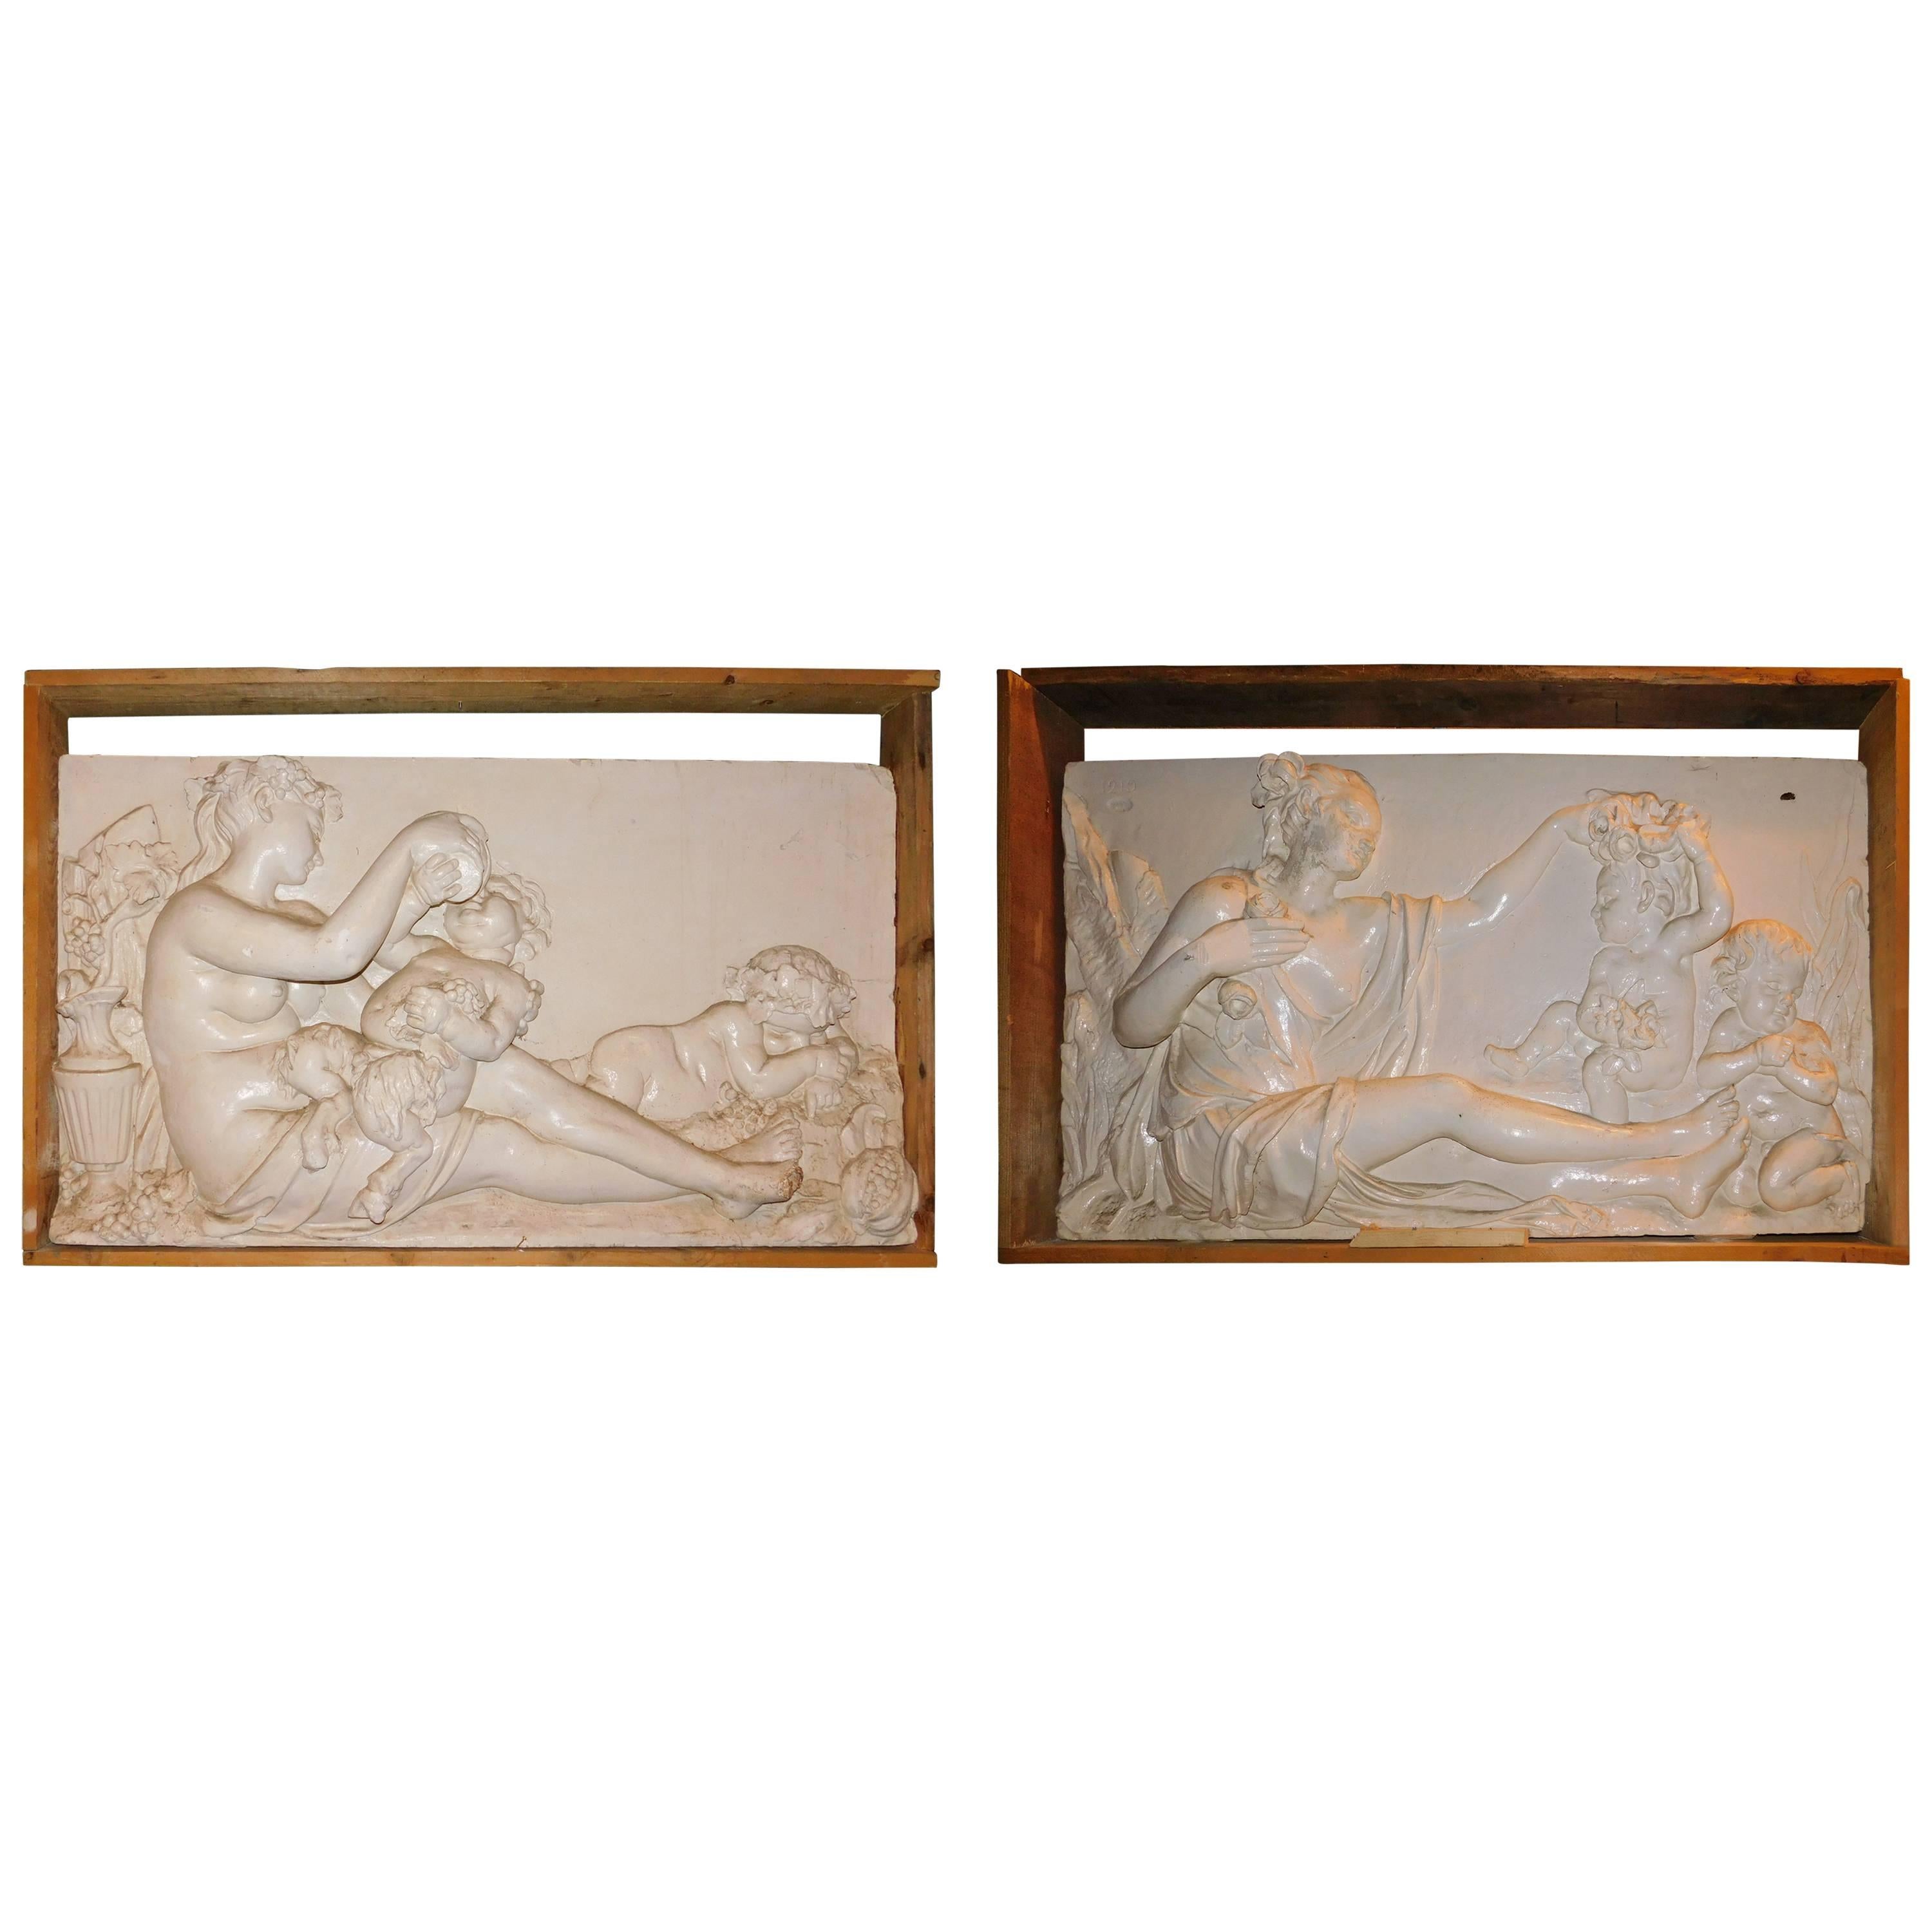 Couple of Antique Panels Made of Scagliola